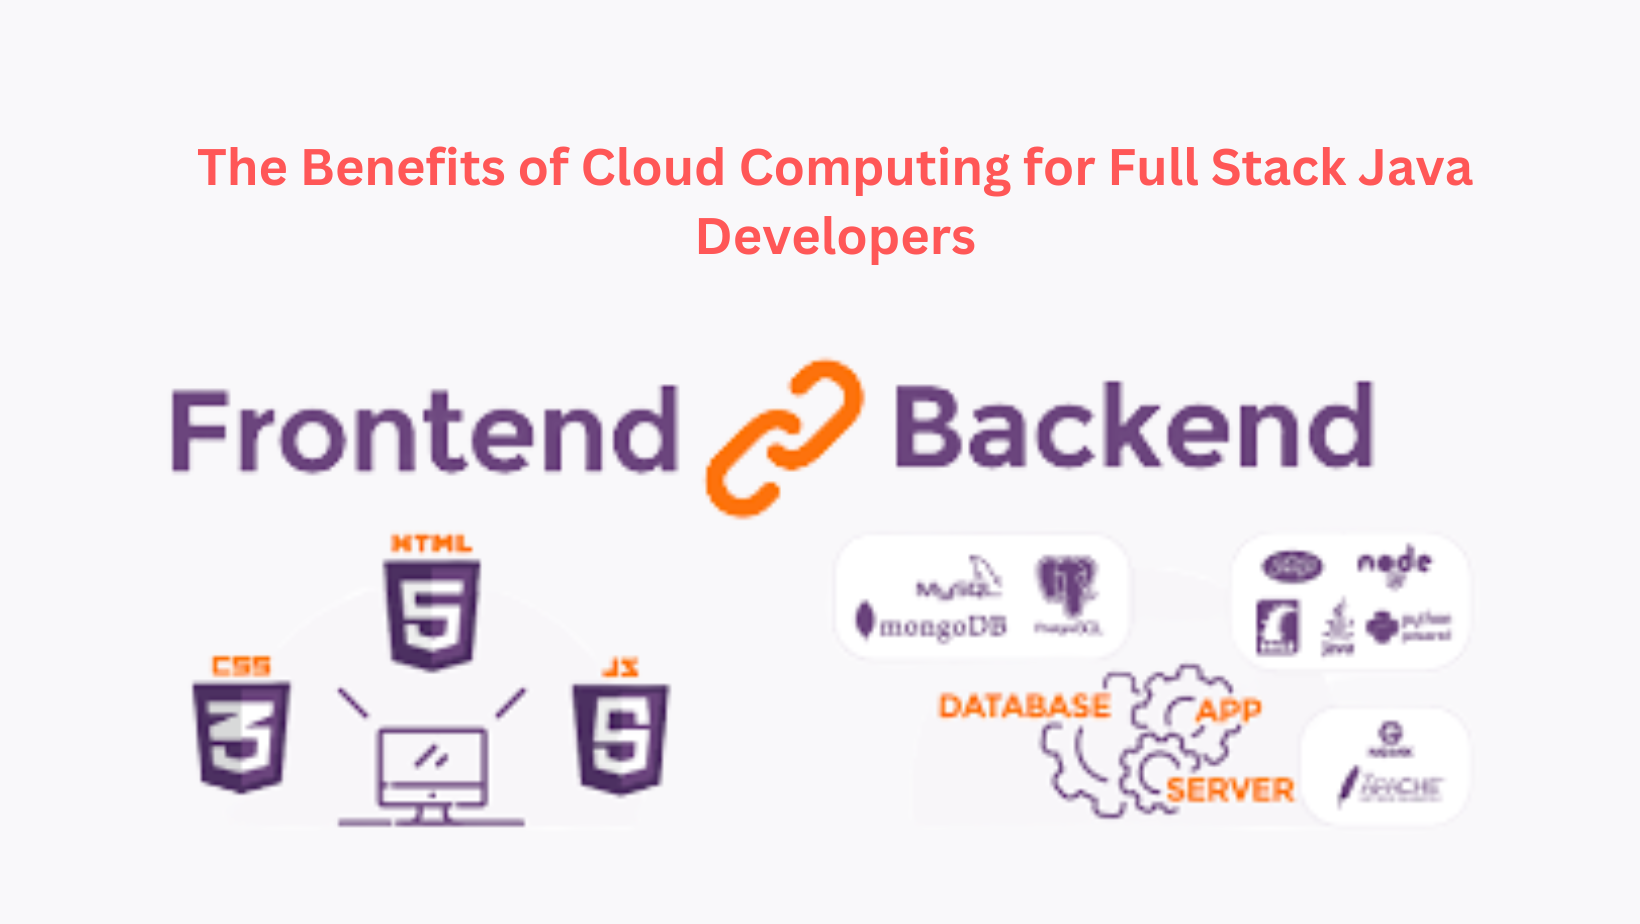 The Benefits of Cloud Computing for Full Stack Java Developers